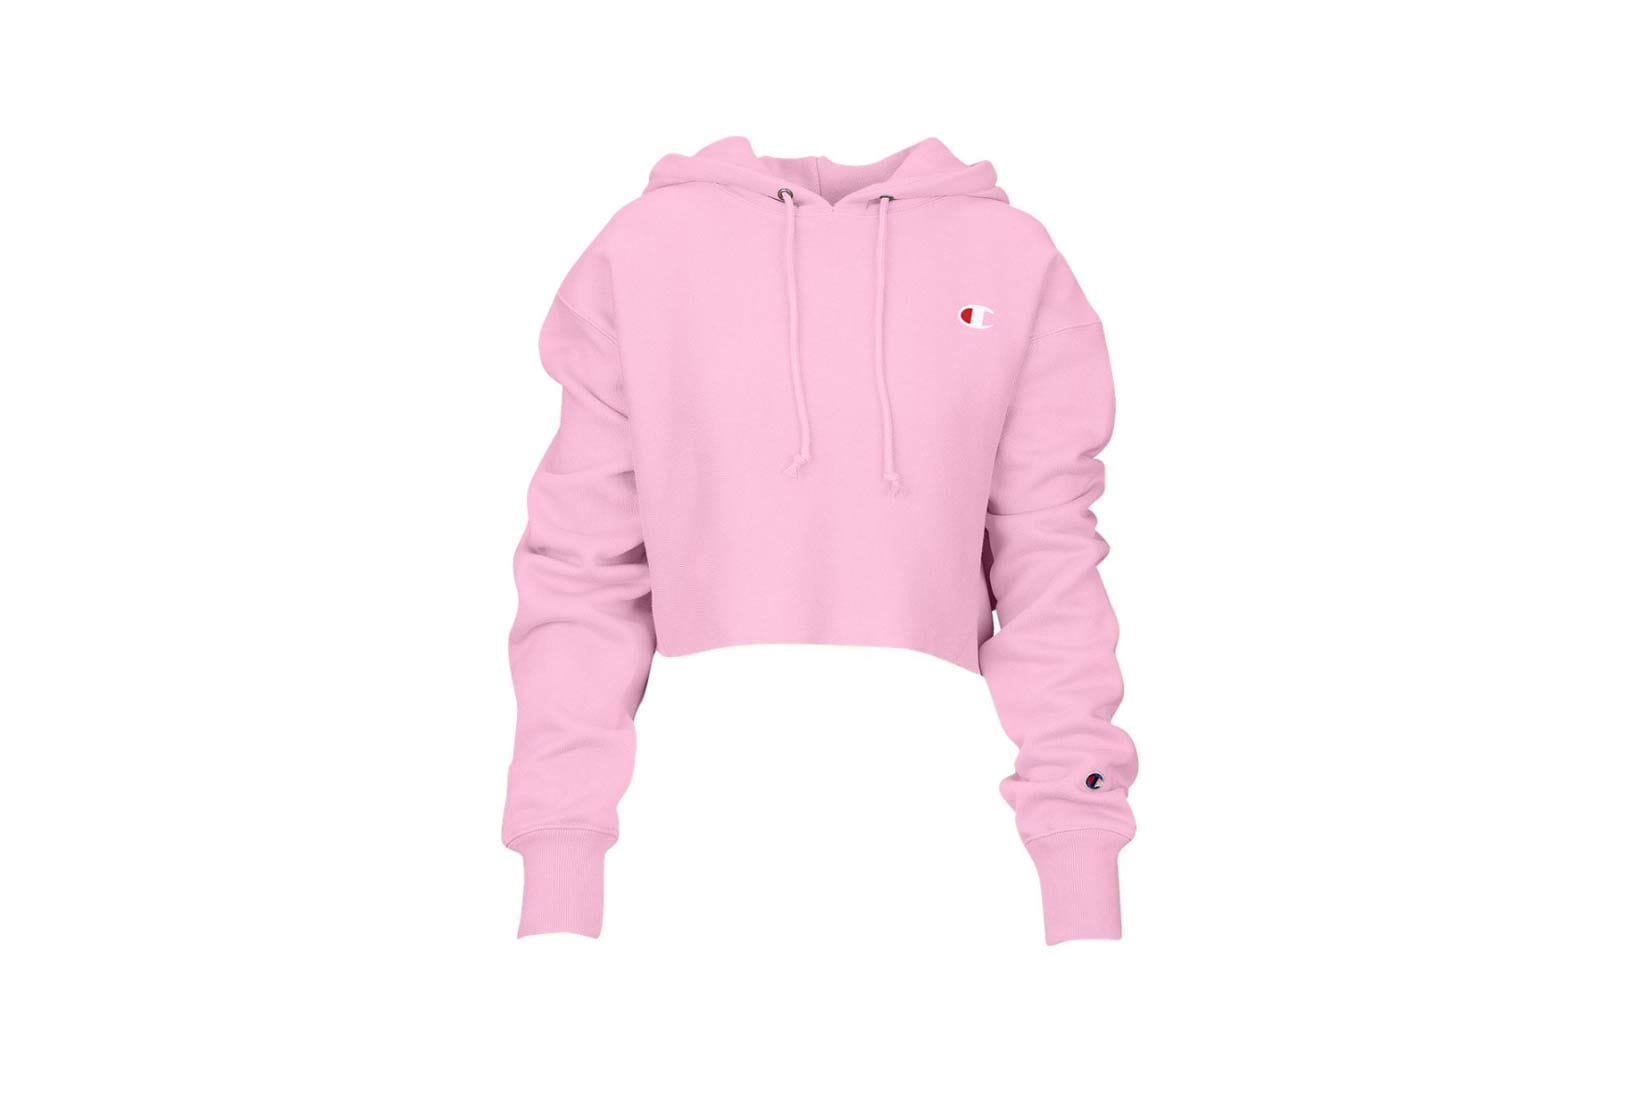 champion cropped hoodie sale